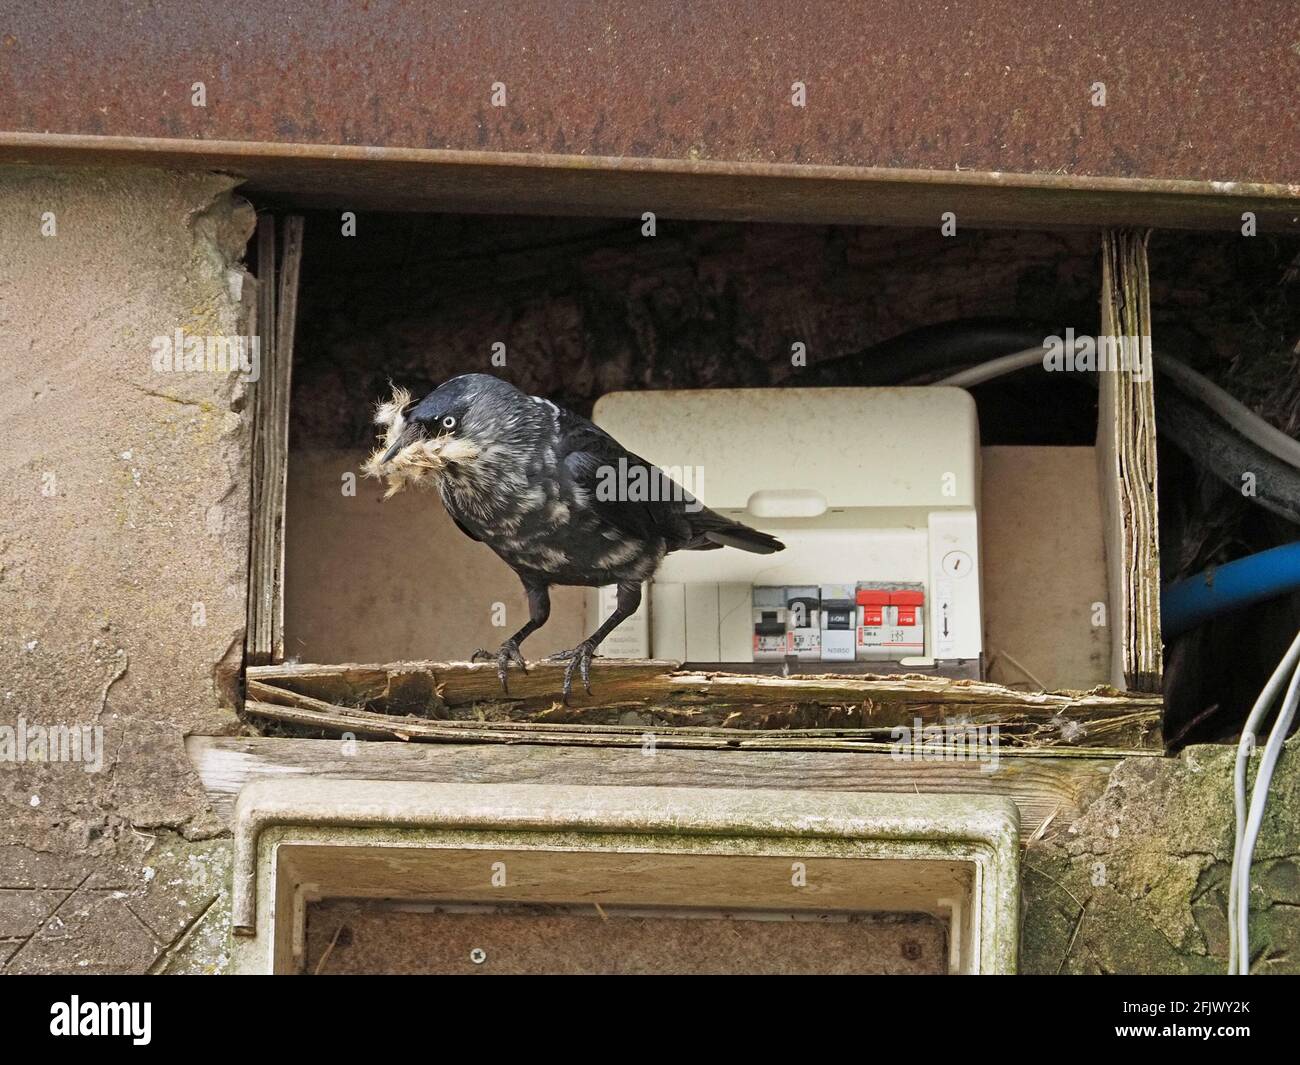 western jackdaw (Corvus monedula) with unusual white mottled plumage carries nesting material beside exposed electrical fuse box in Cumbria,England,UK Stock Photo